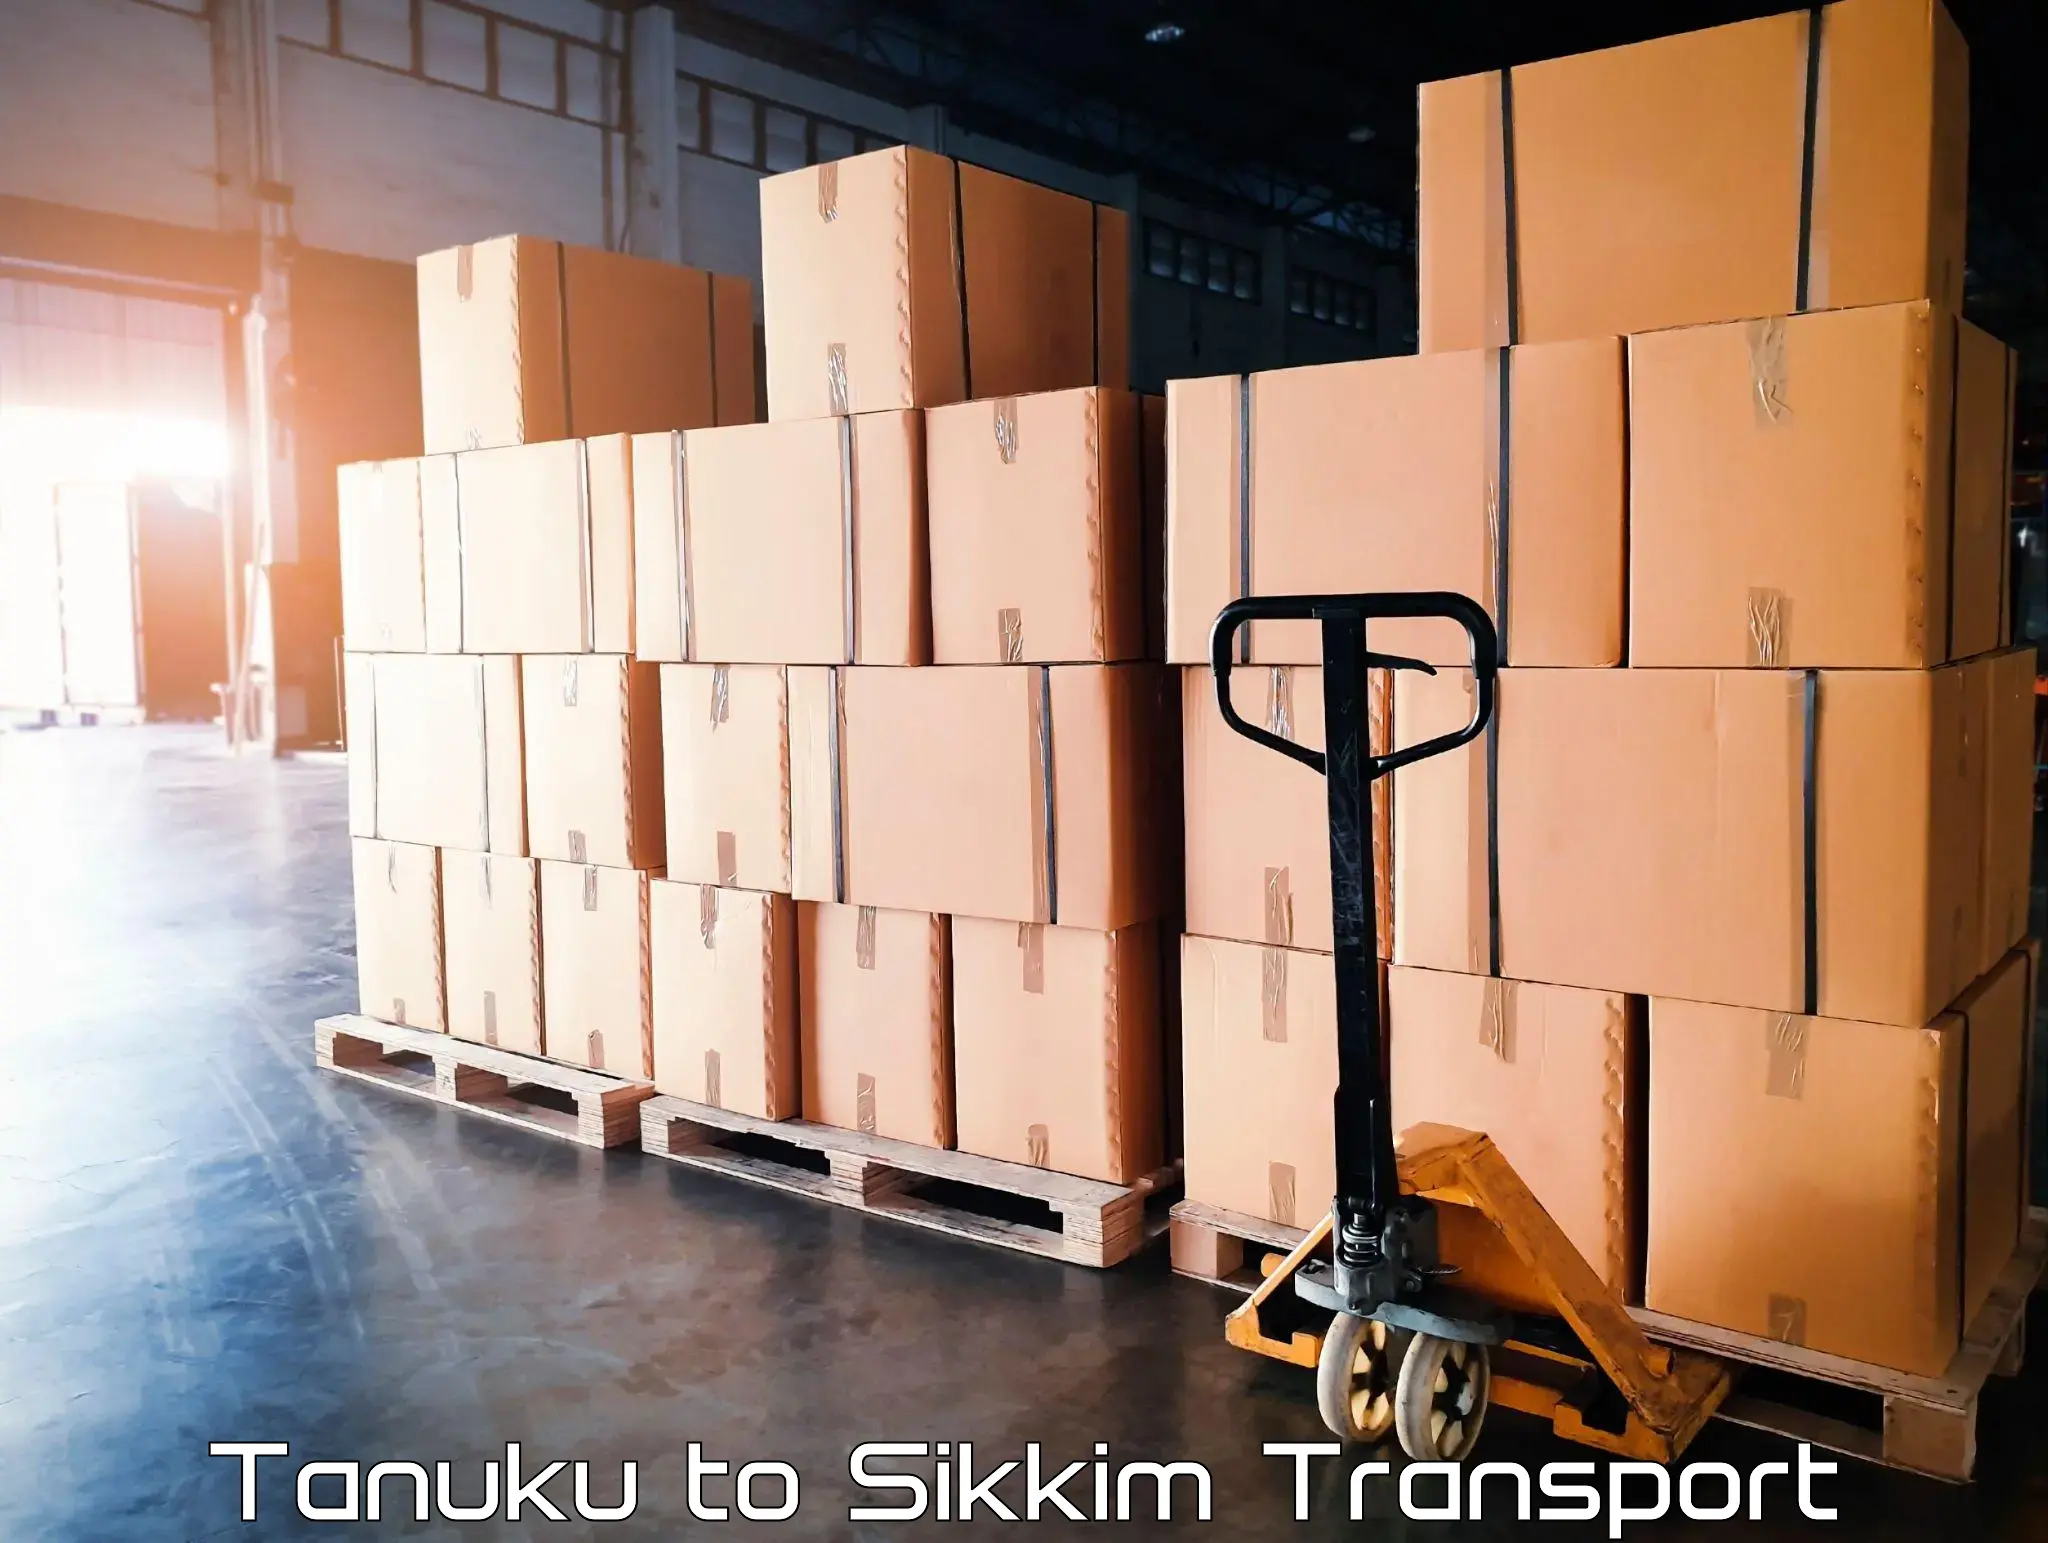 Transport bike from one state to another Tanuku to Sikkim